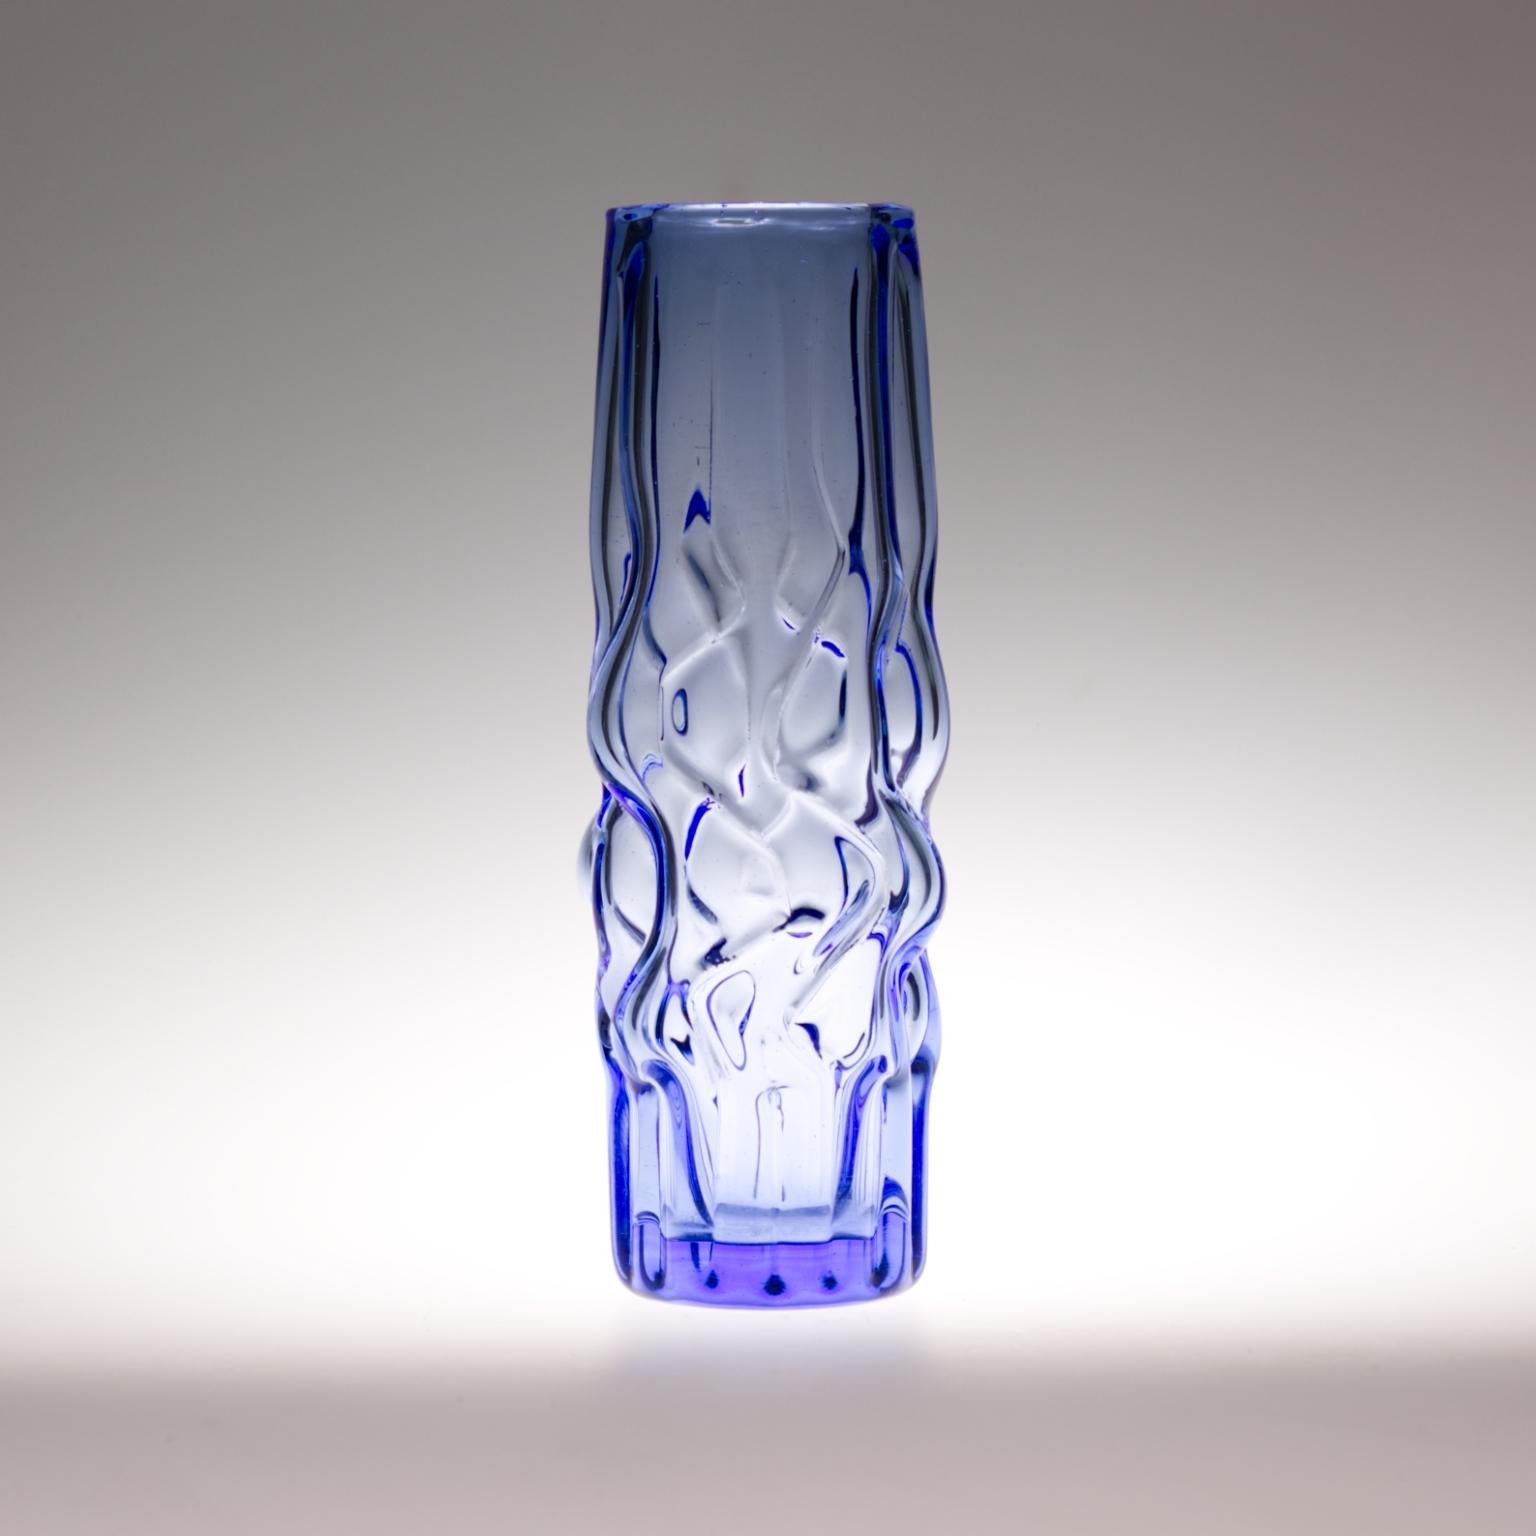 Beautiful blue color vase made in Czechoslovakia. Produced in Novy Bor in 1968, designed by Pavel Hlava. The vase comes from a series of vases popularly called the 